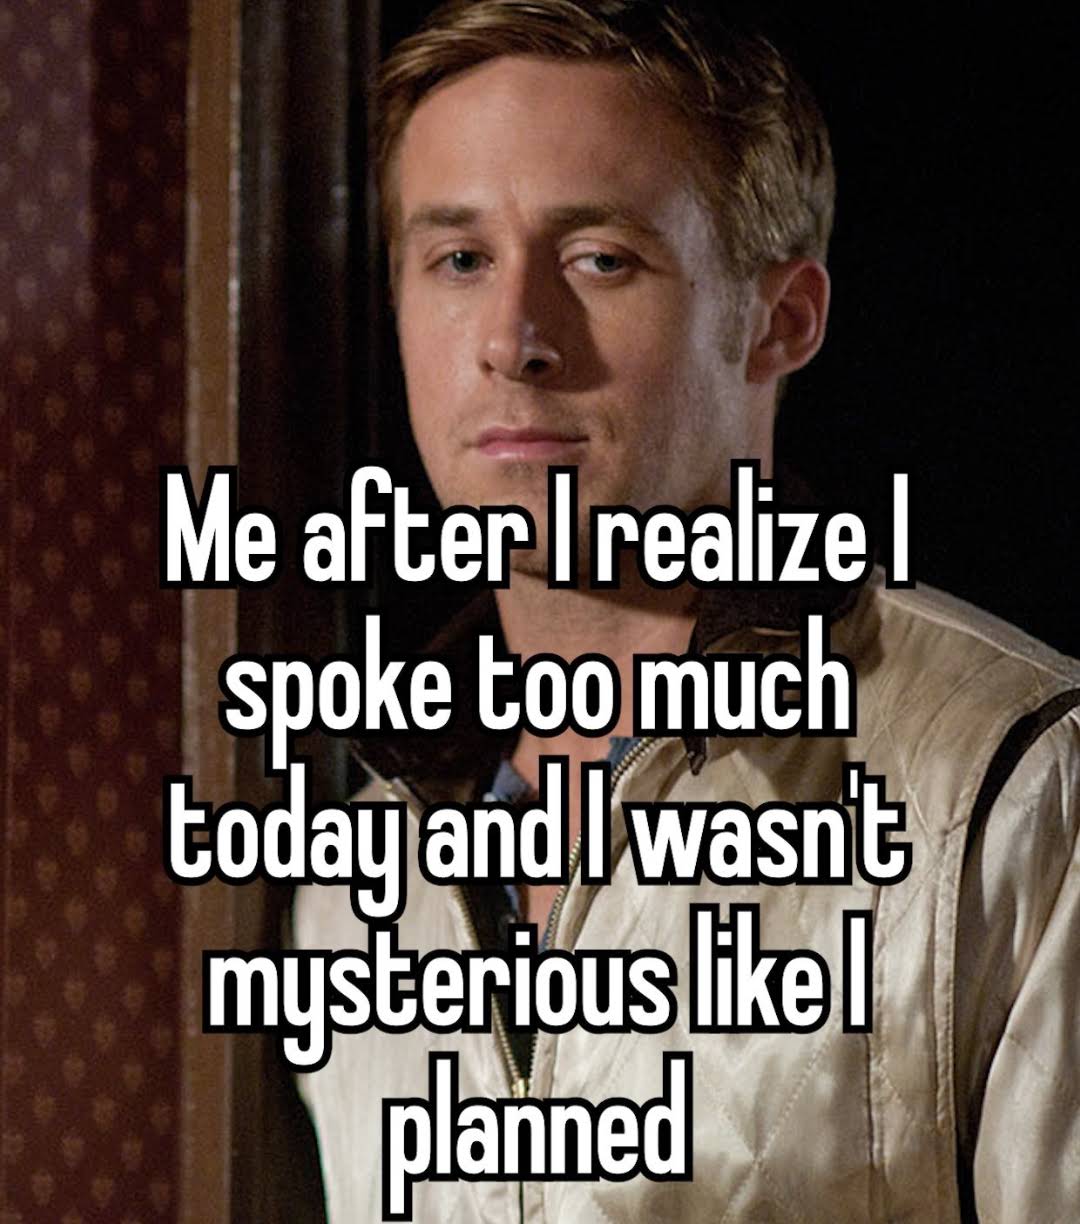 funny memes and pics - cool and mysterious meme - Me after I realize I spoke too much today and I wasn't mysterious I planned